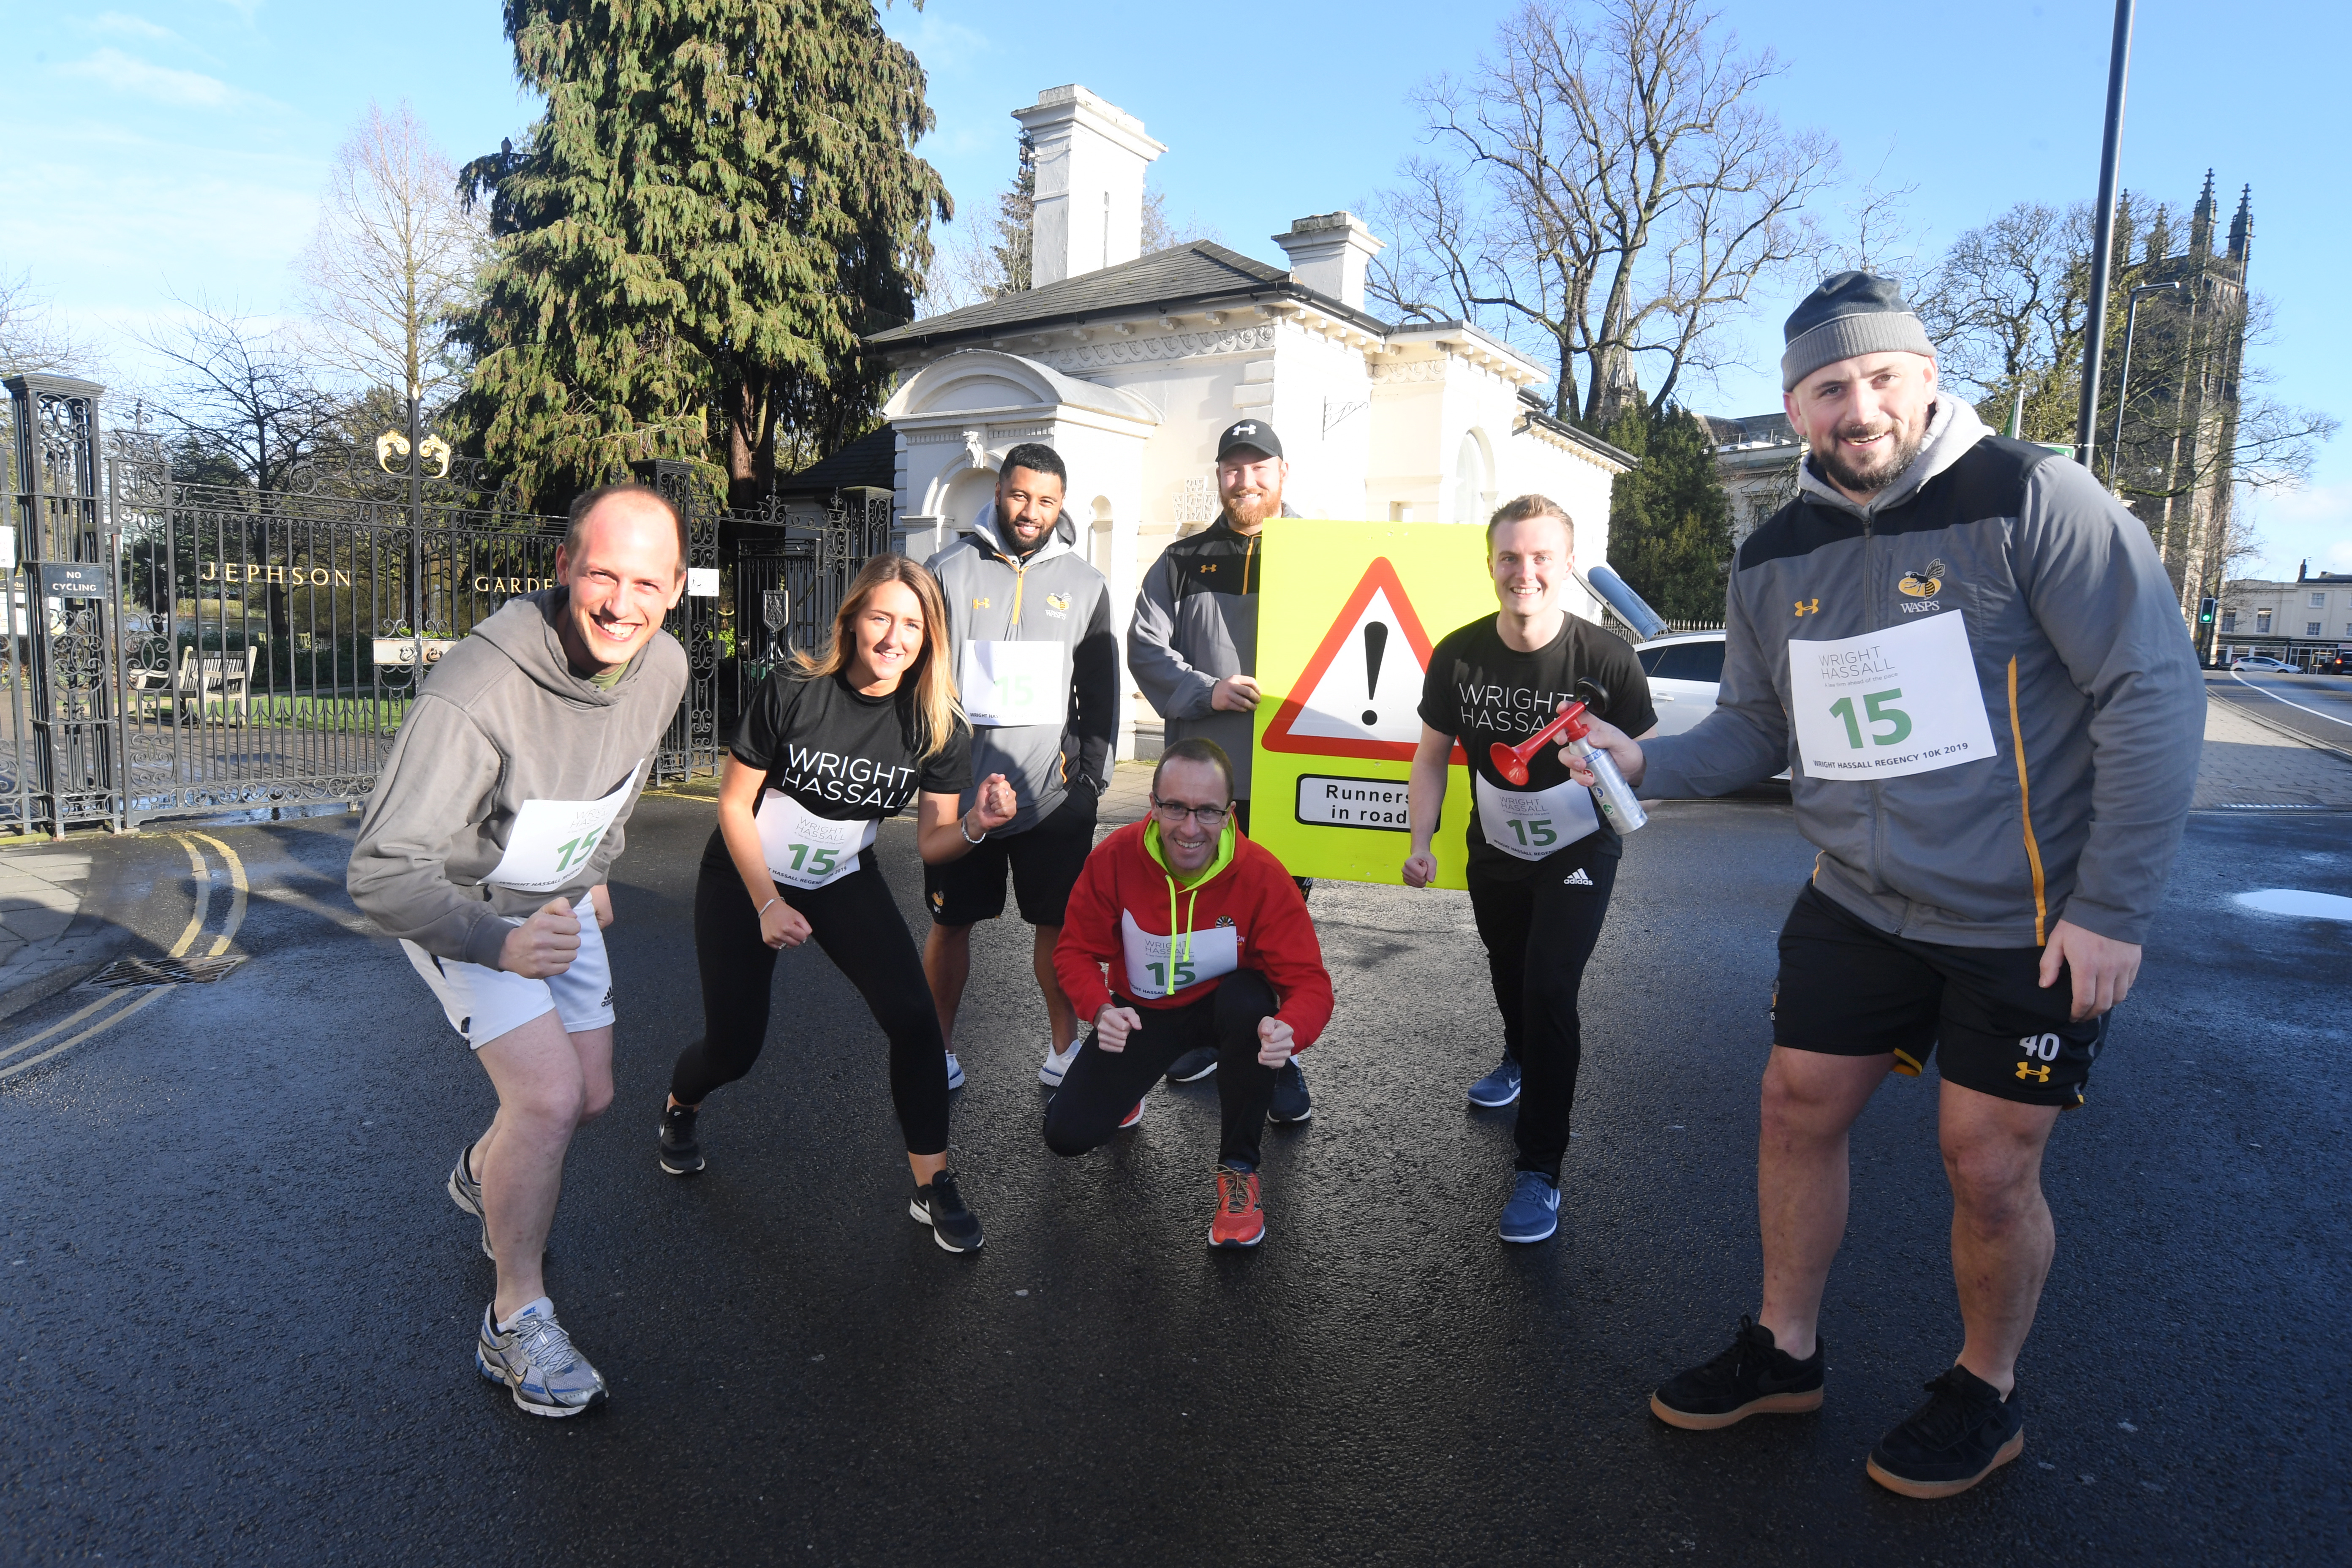 Wasps stars encourage runners to sign up for Wright Hassall Regency 10k